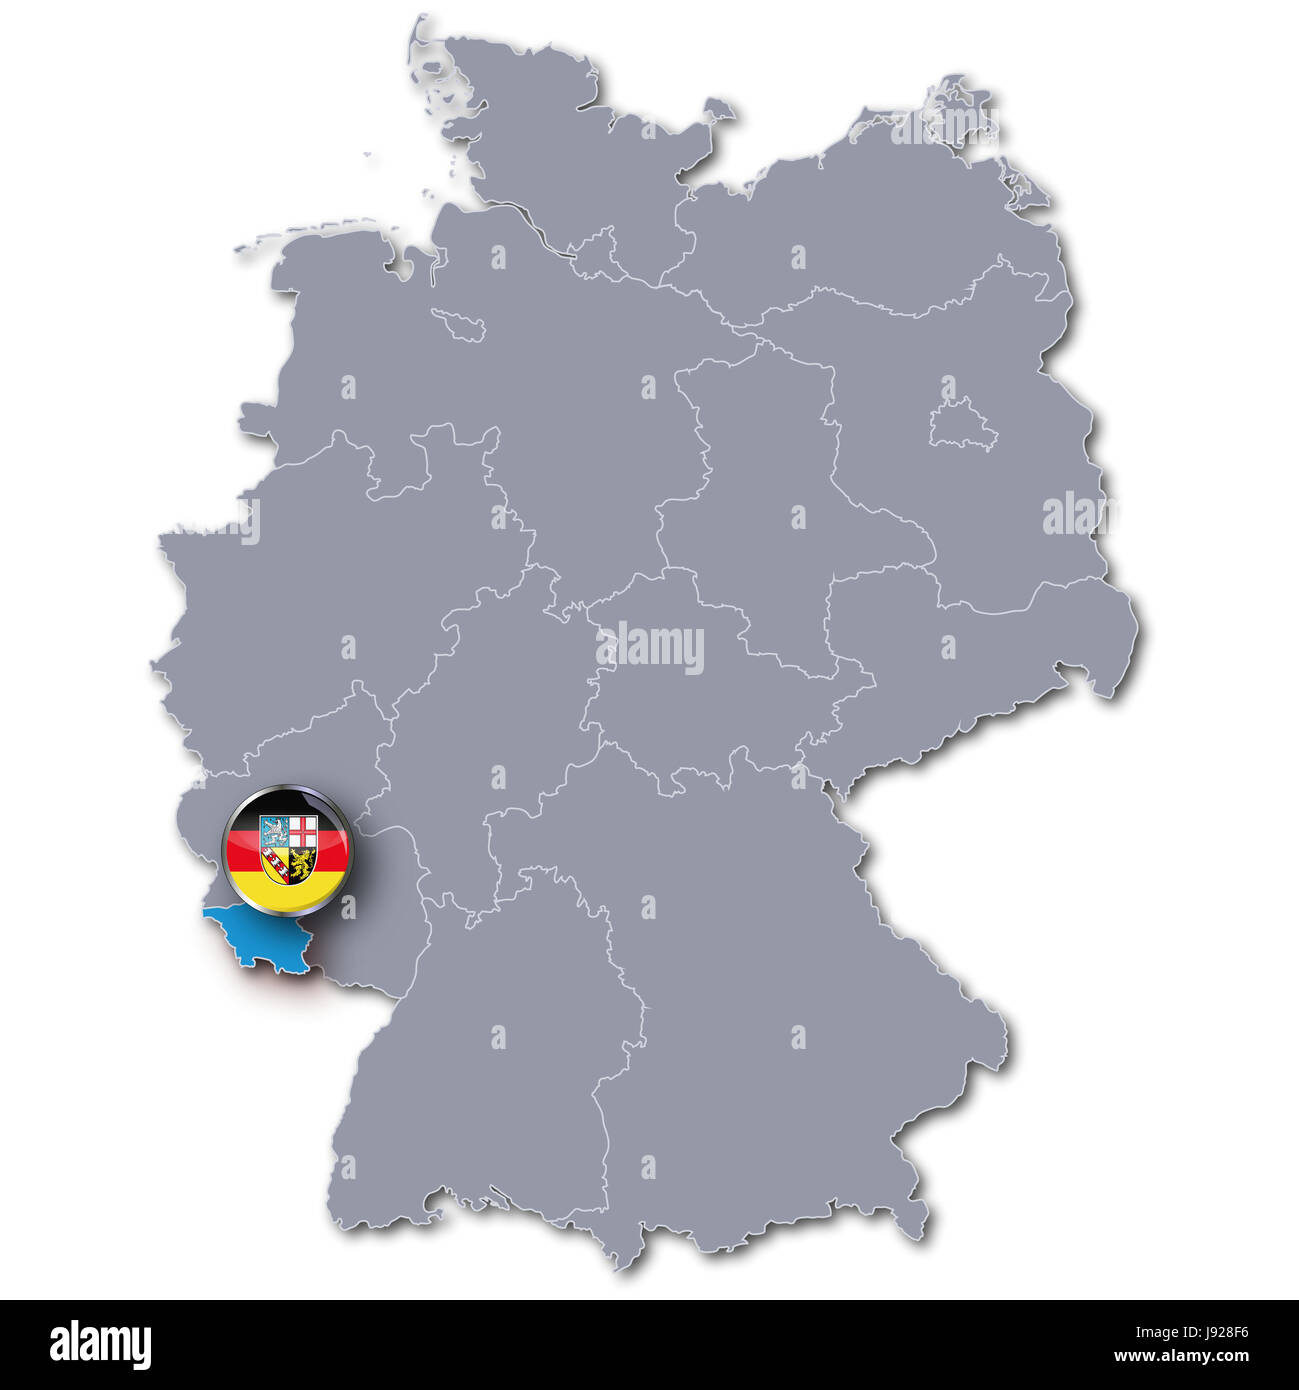 card, state, atlas, map of the world, map, border, flag, card, area, german, Stock Photo